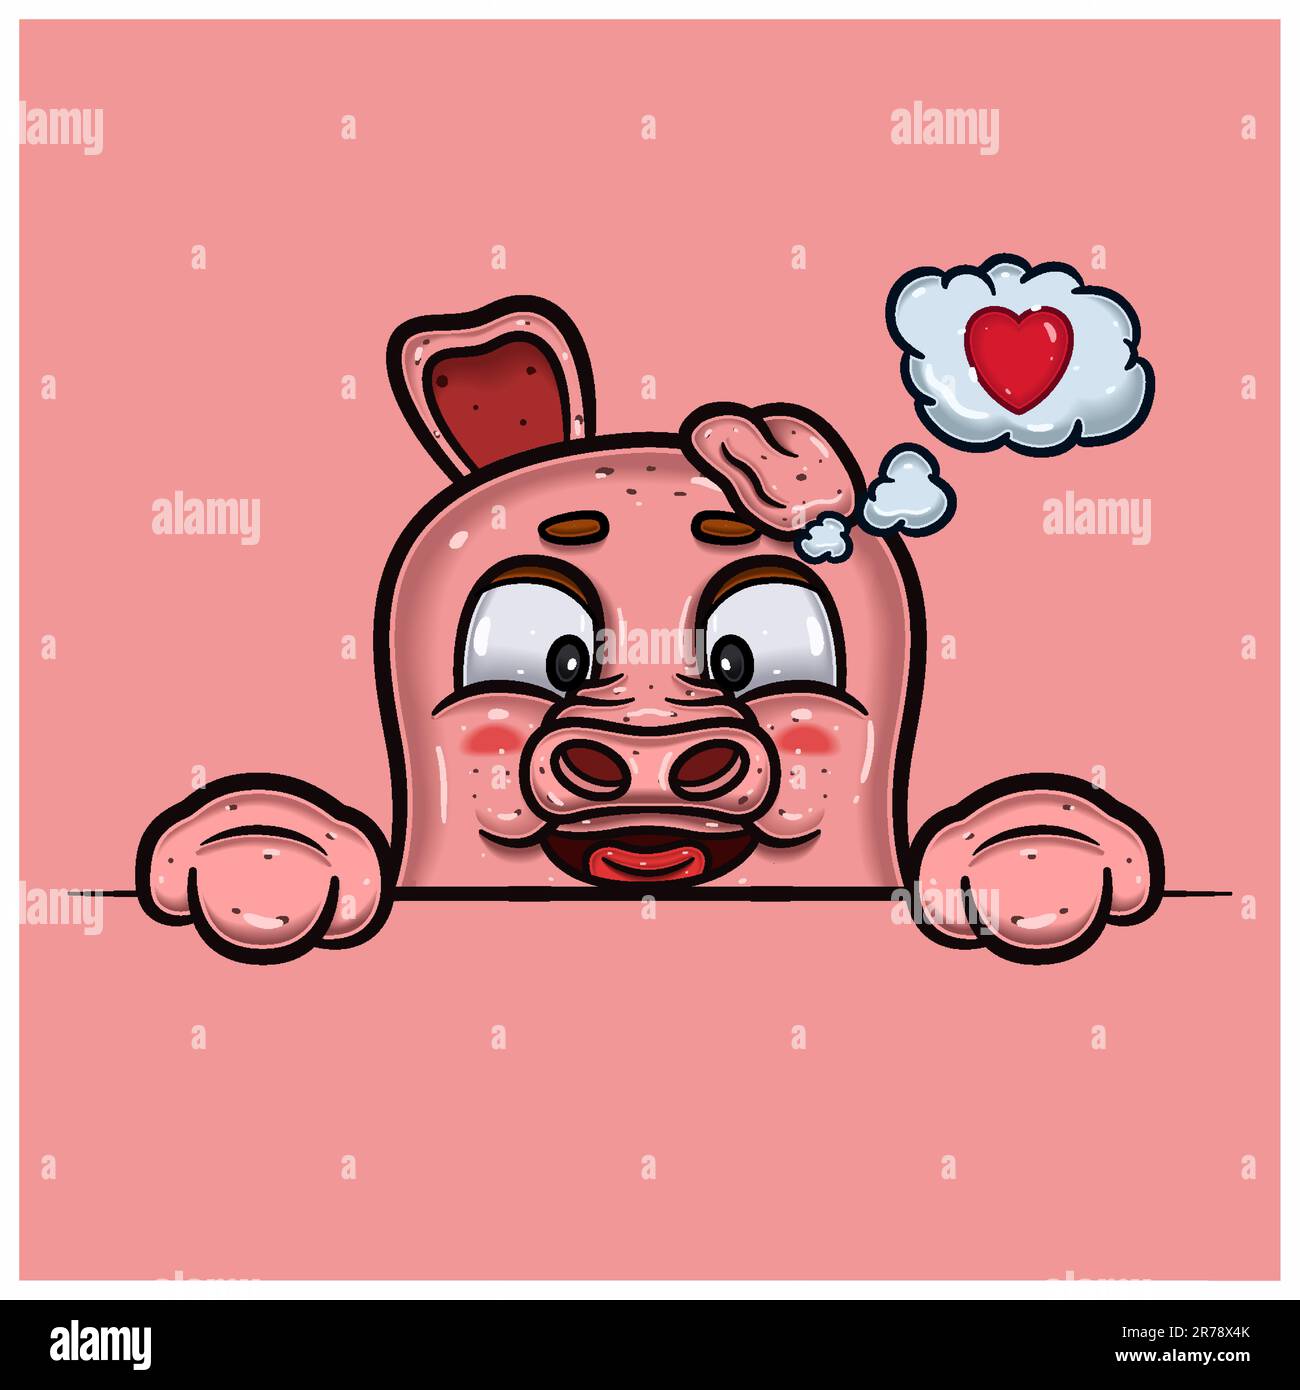 Loving Face Expression With Pig Cartoon. Vector and Illustration Stock Vector